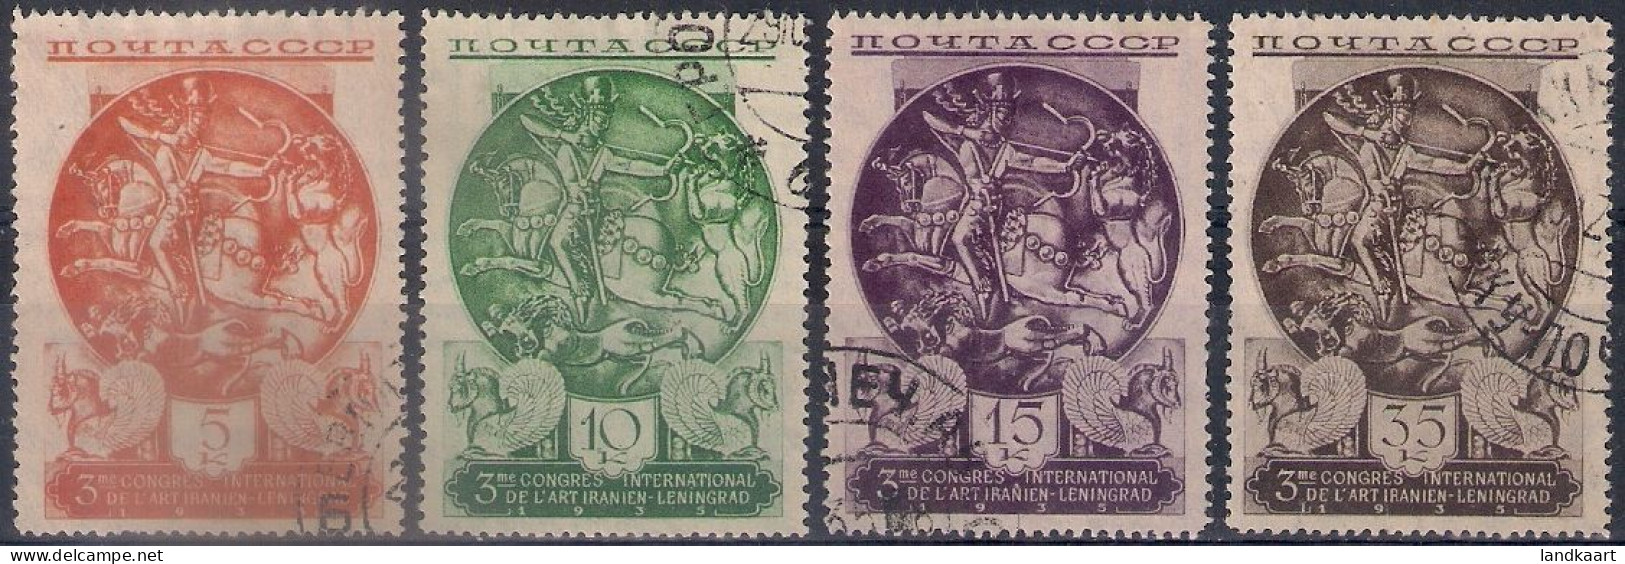 Russia 1935, Michel Nr 528-31, Used - Used Stamps